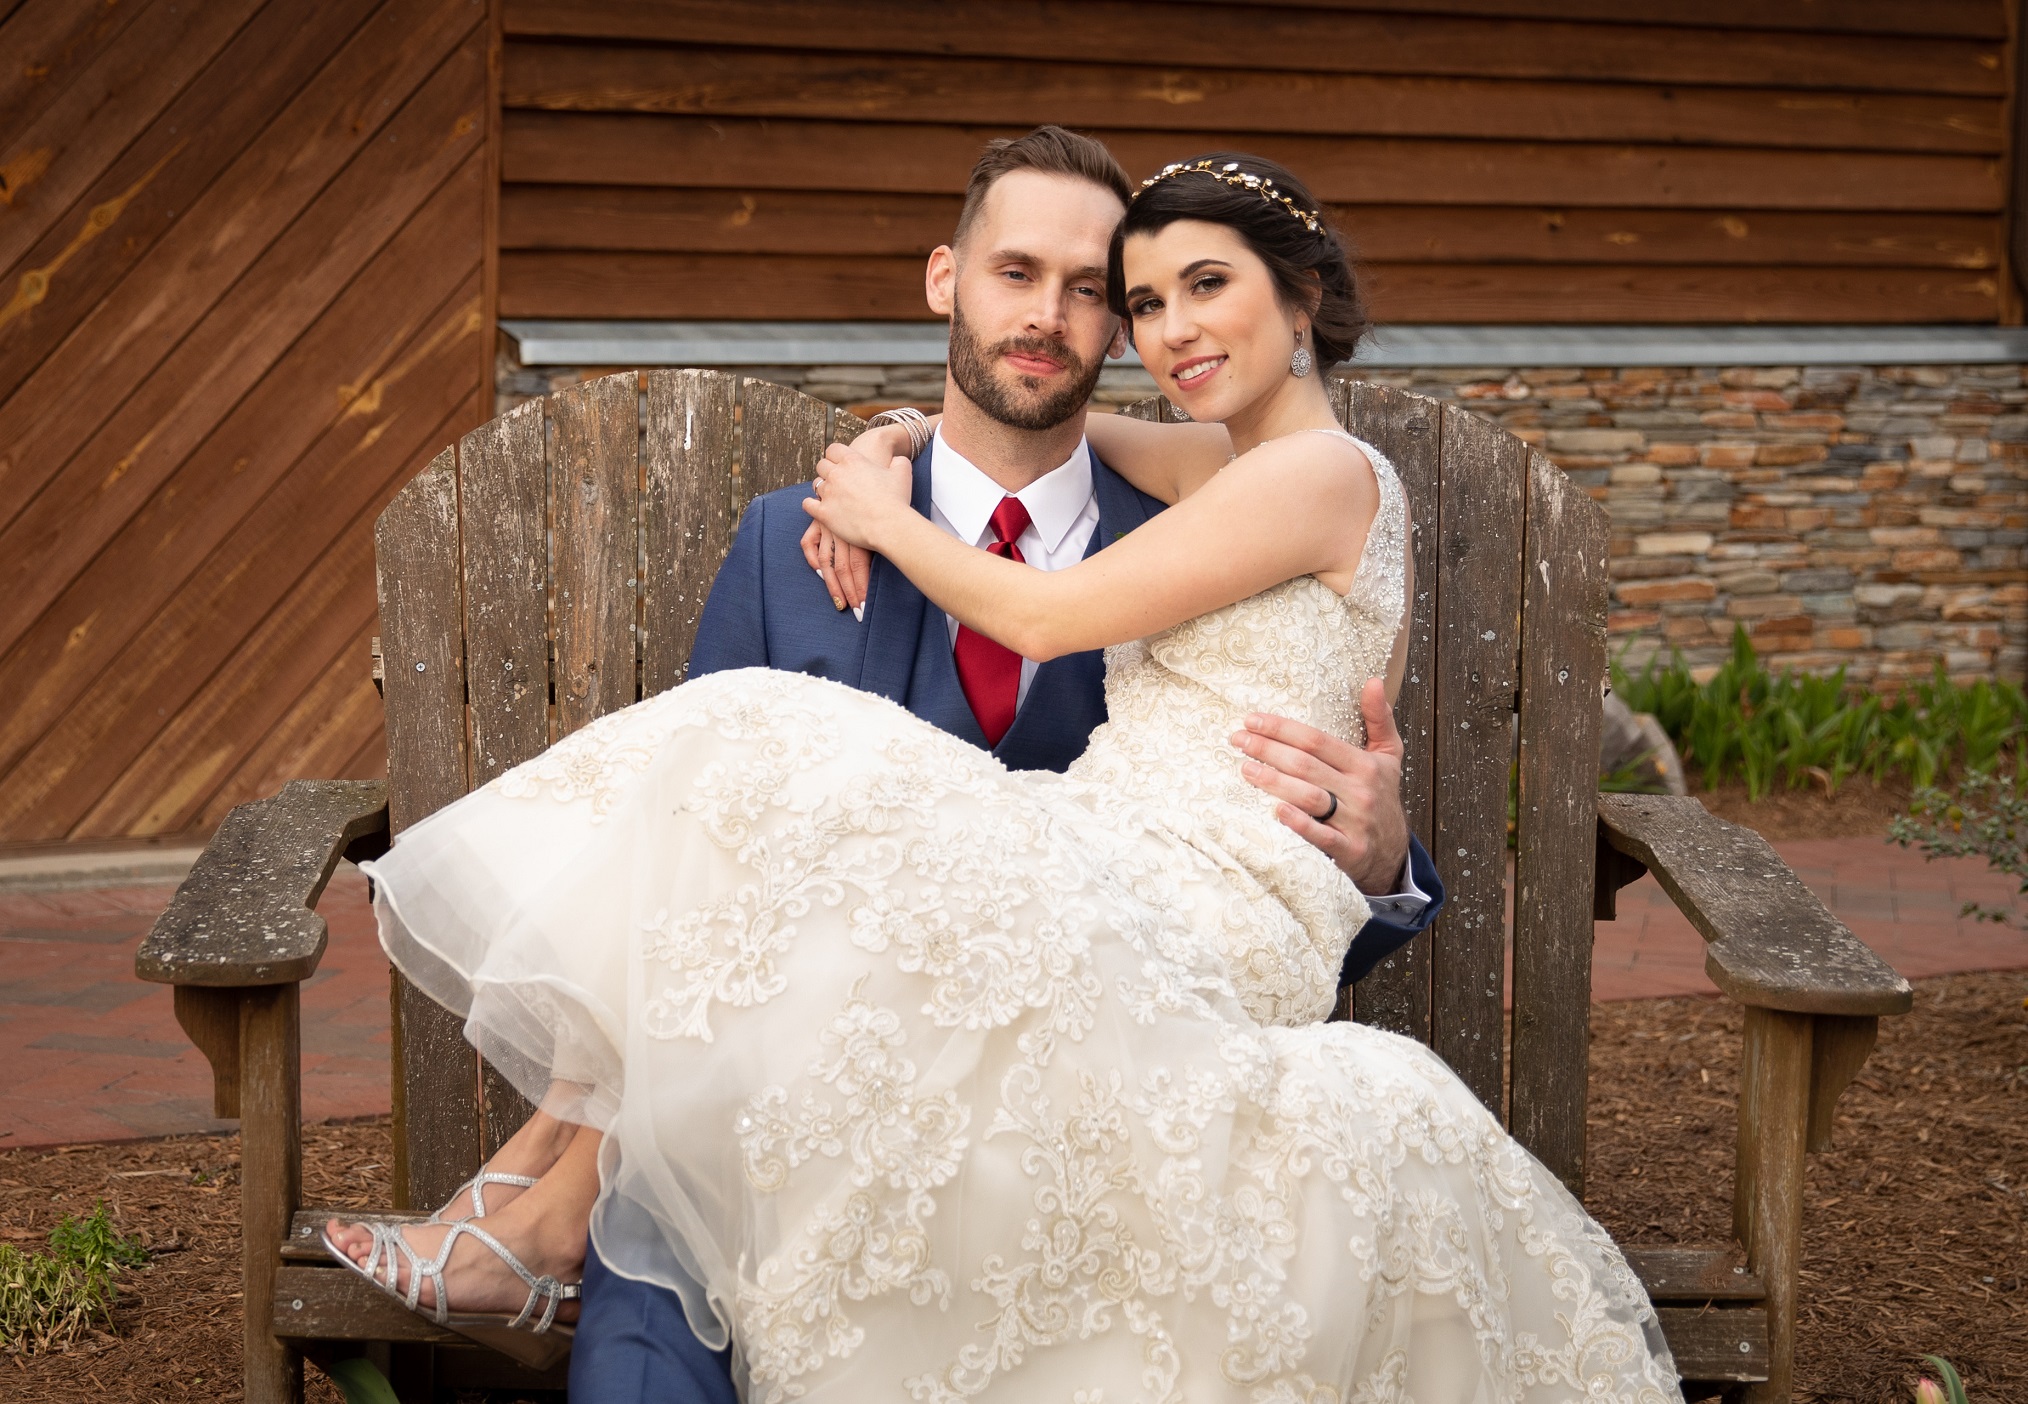 married at first sight wedding dresses